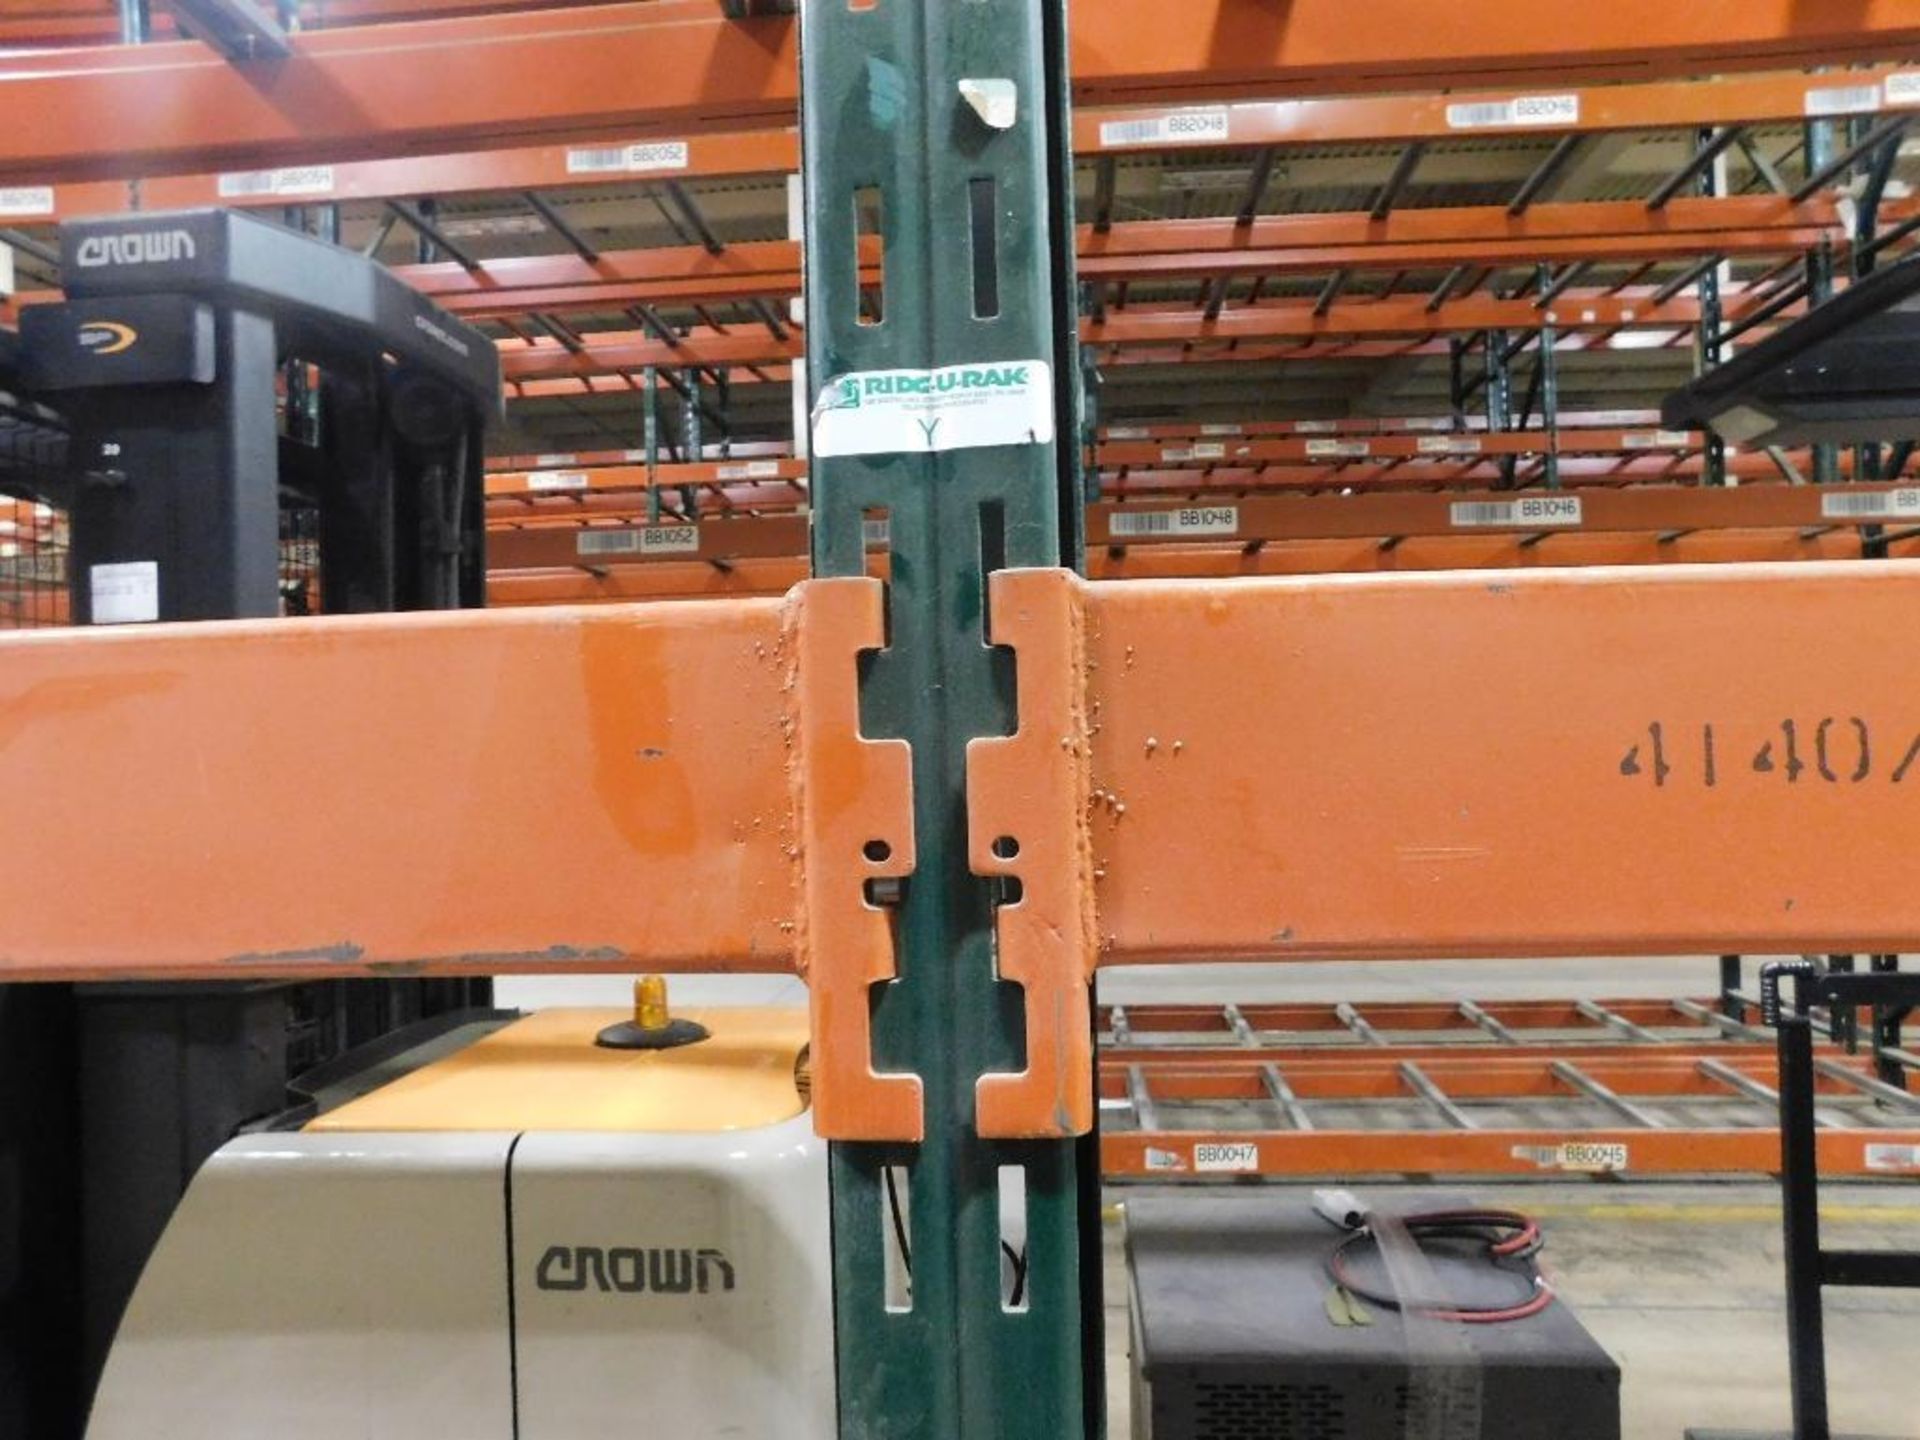 (10X) SECTIONS OF RIDG-U-RAK PALLET RACKING, (2) 20 FT. UPRIGHTS, (9) 16 FT. UPRIGHTS, (2) 4 1/2 IN. - Image 4 of 4